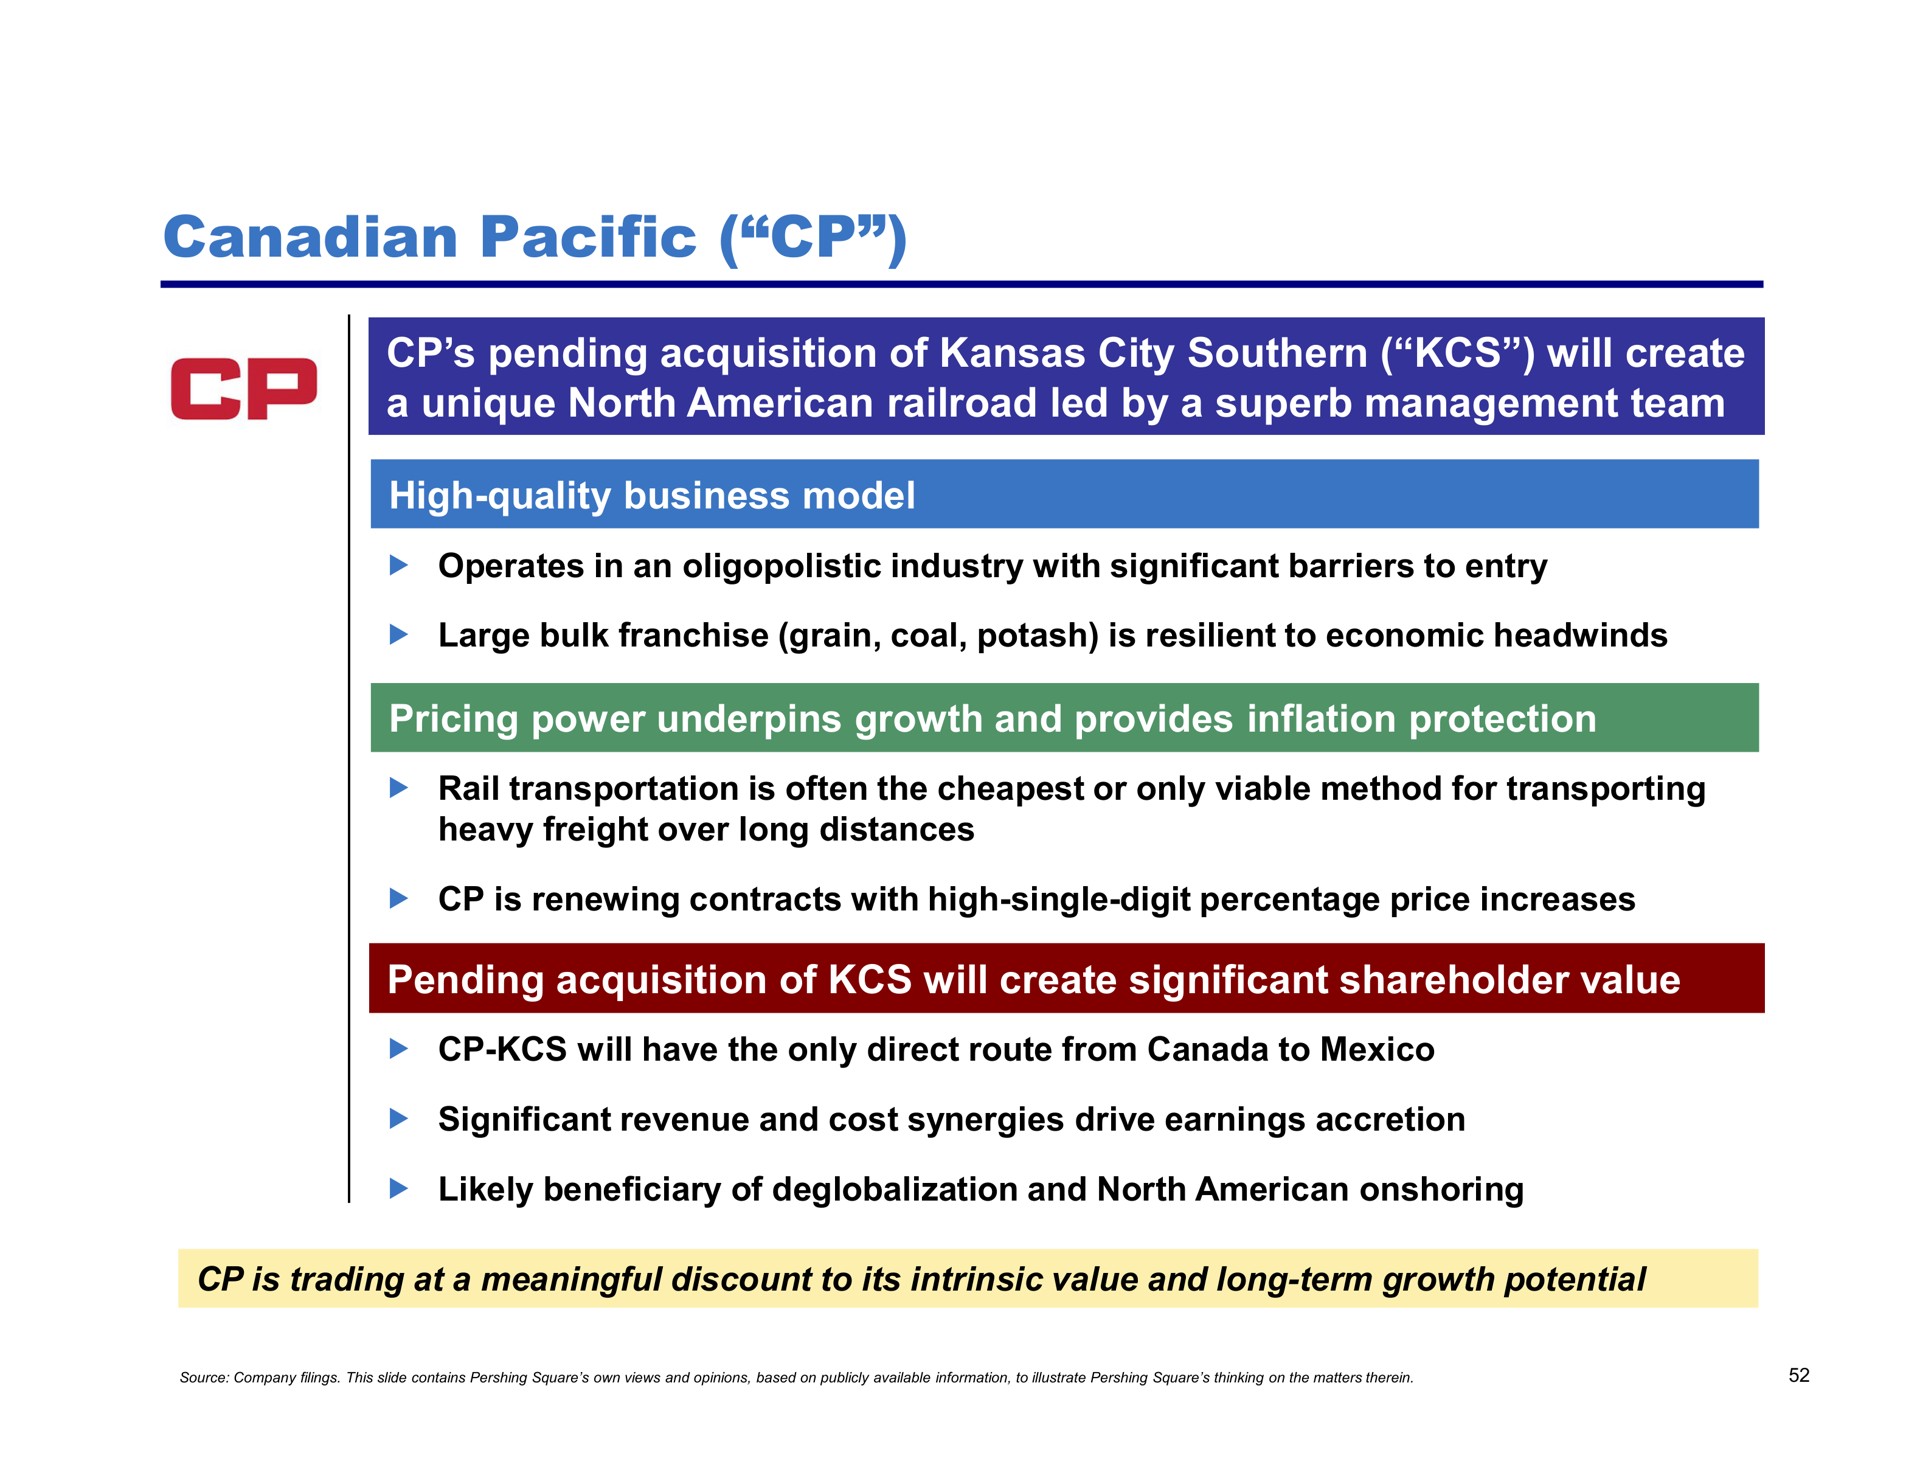 pacific pending acquisition of city southern will create a unique north railroad led by a superb management team high quality business model pricing power underpins growth and provides inflation protection pending acquisition of will create significant shareholder value | Pershing Square